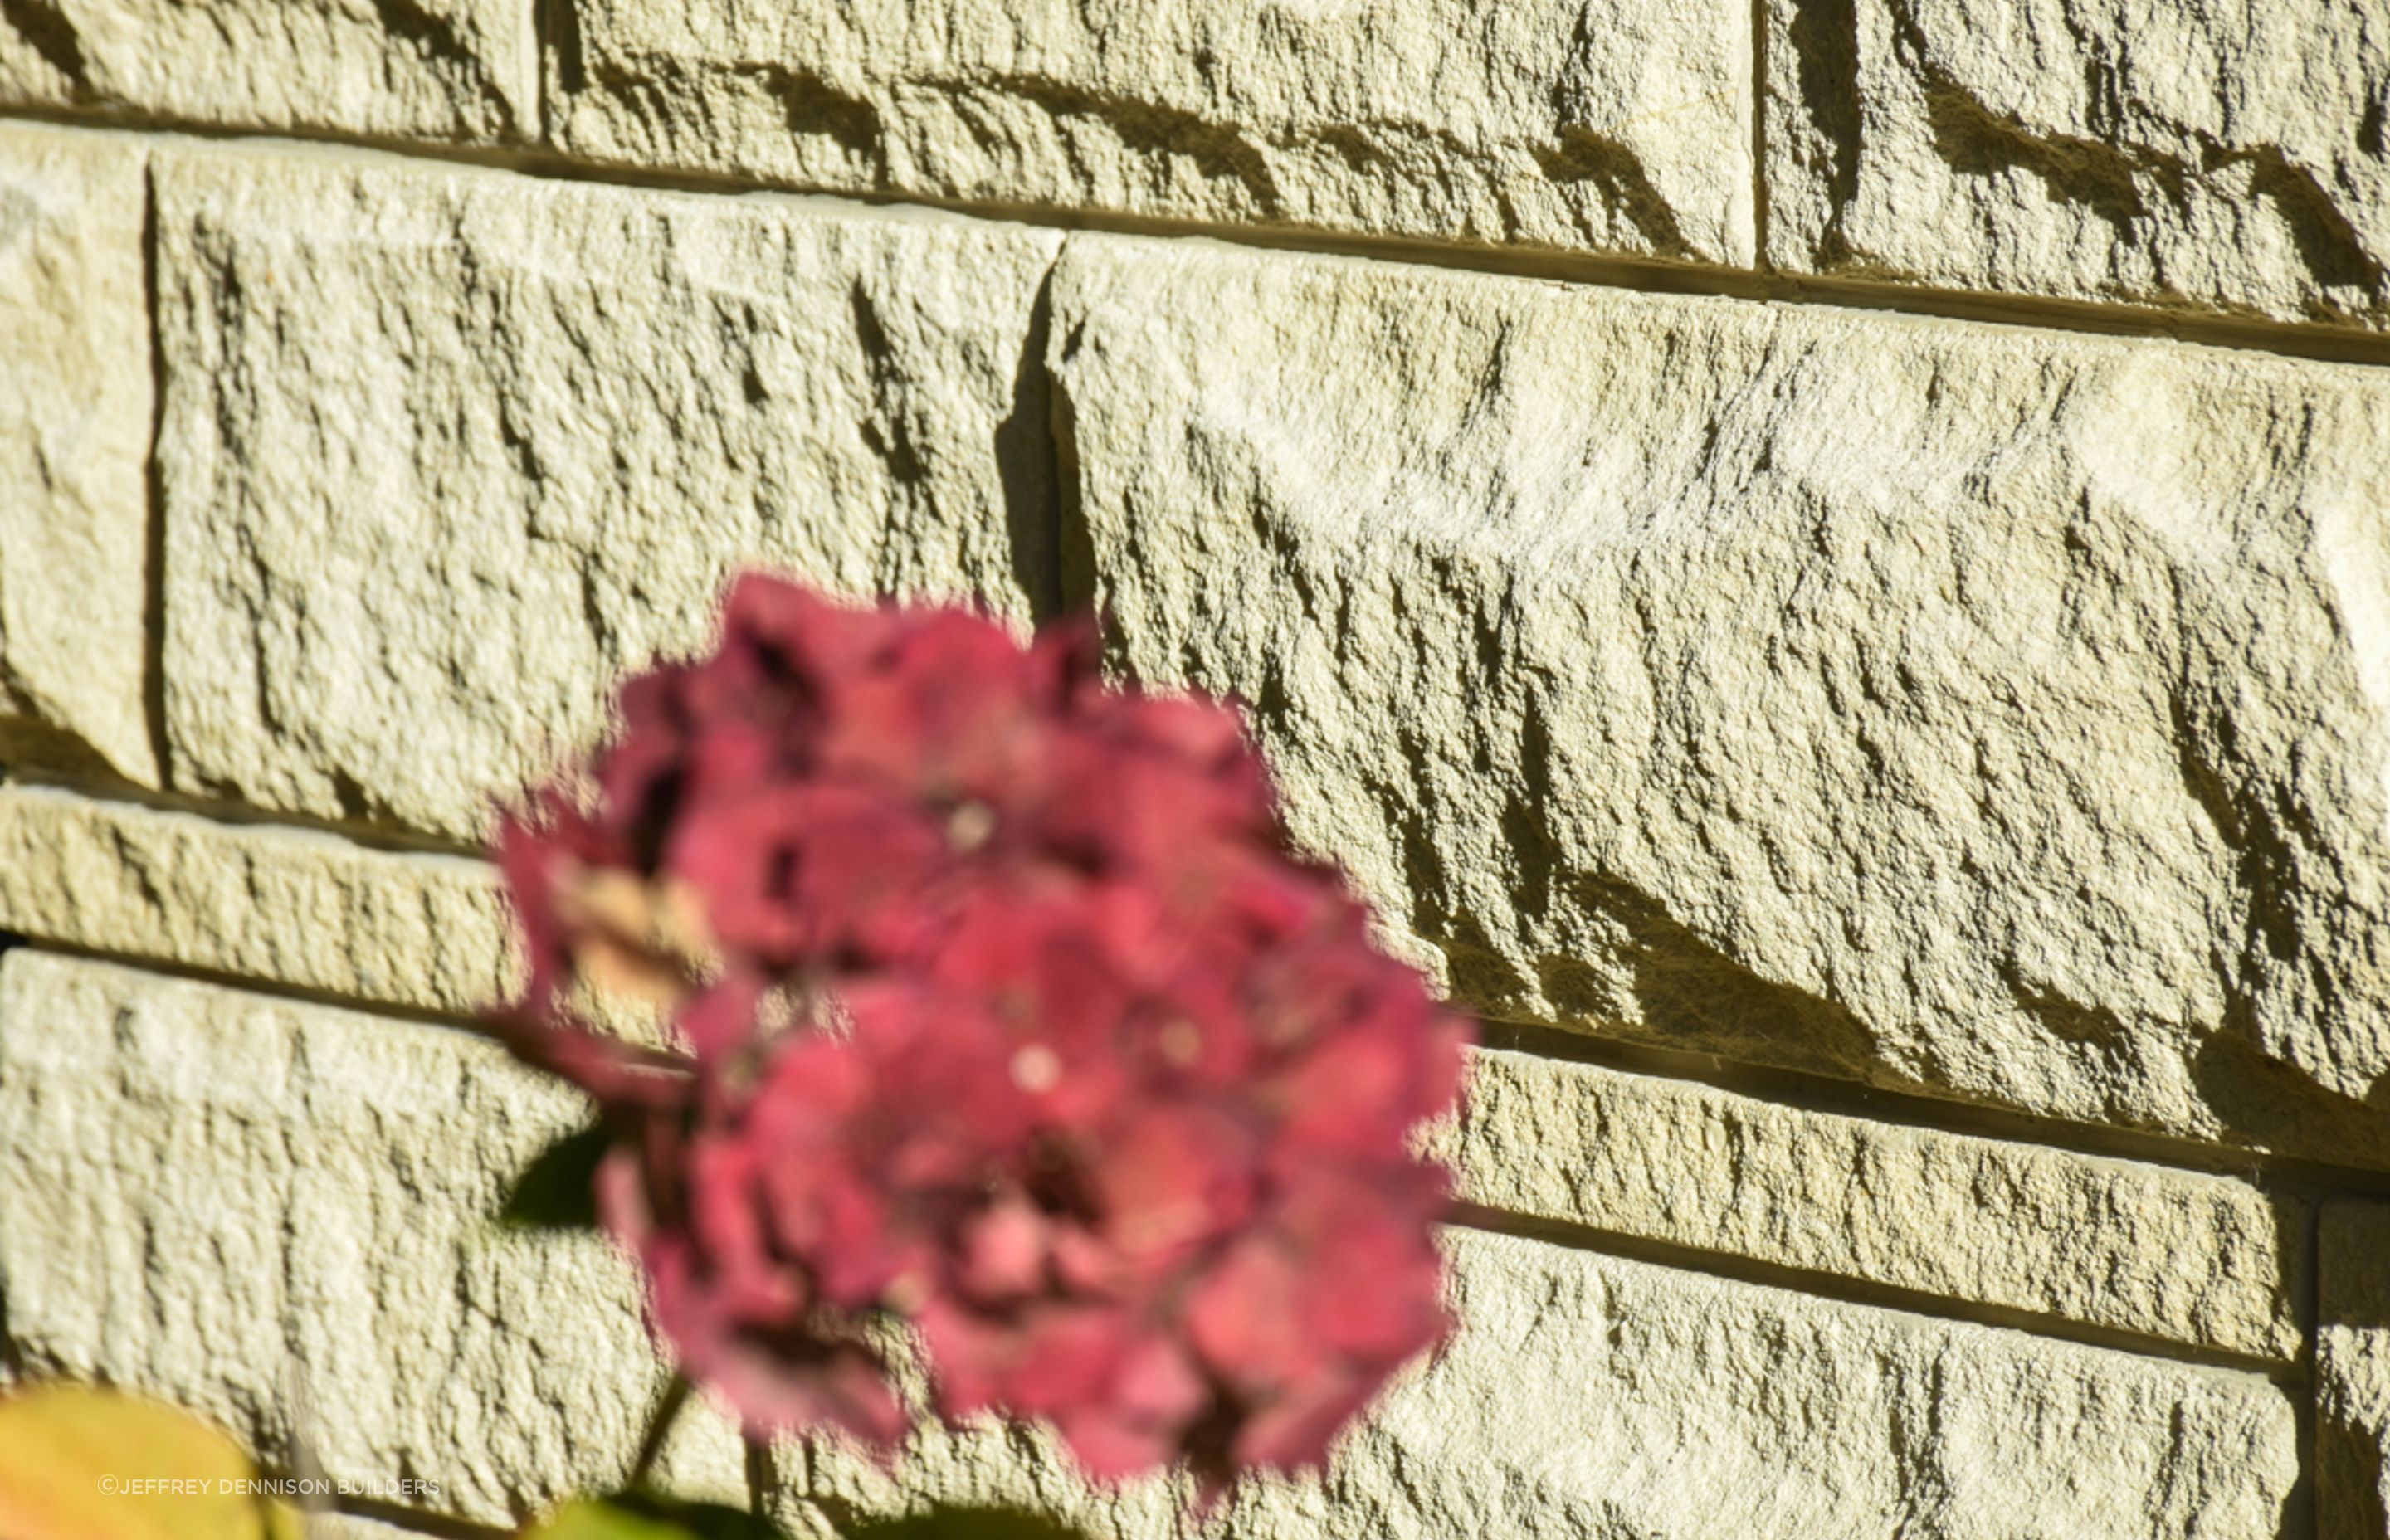 Close up of the cleaned/restored work revealing the natural beauty and durability of Oamaru stone